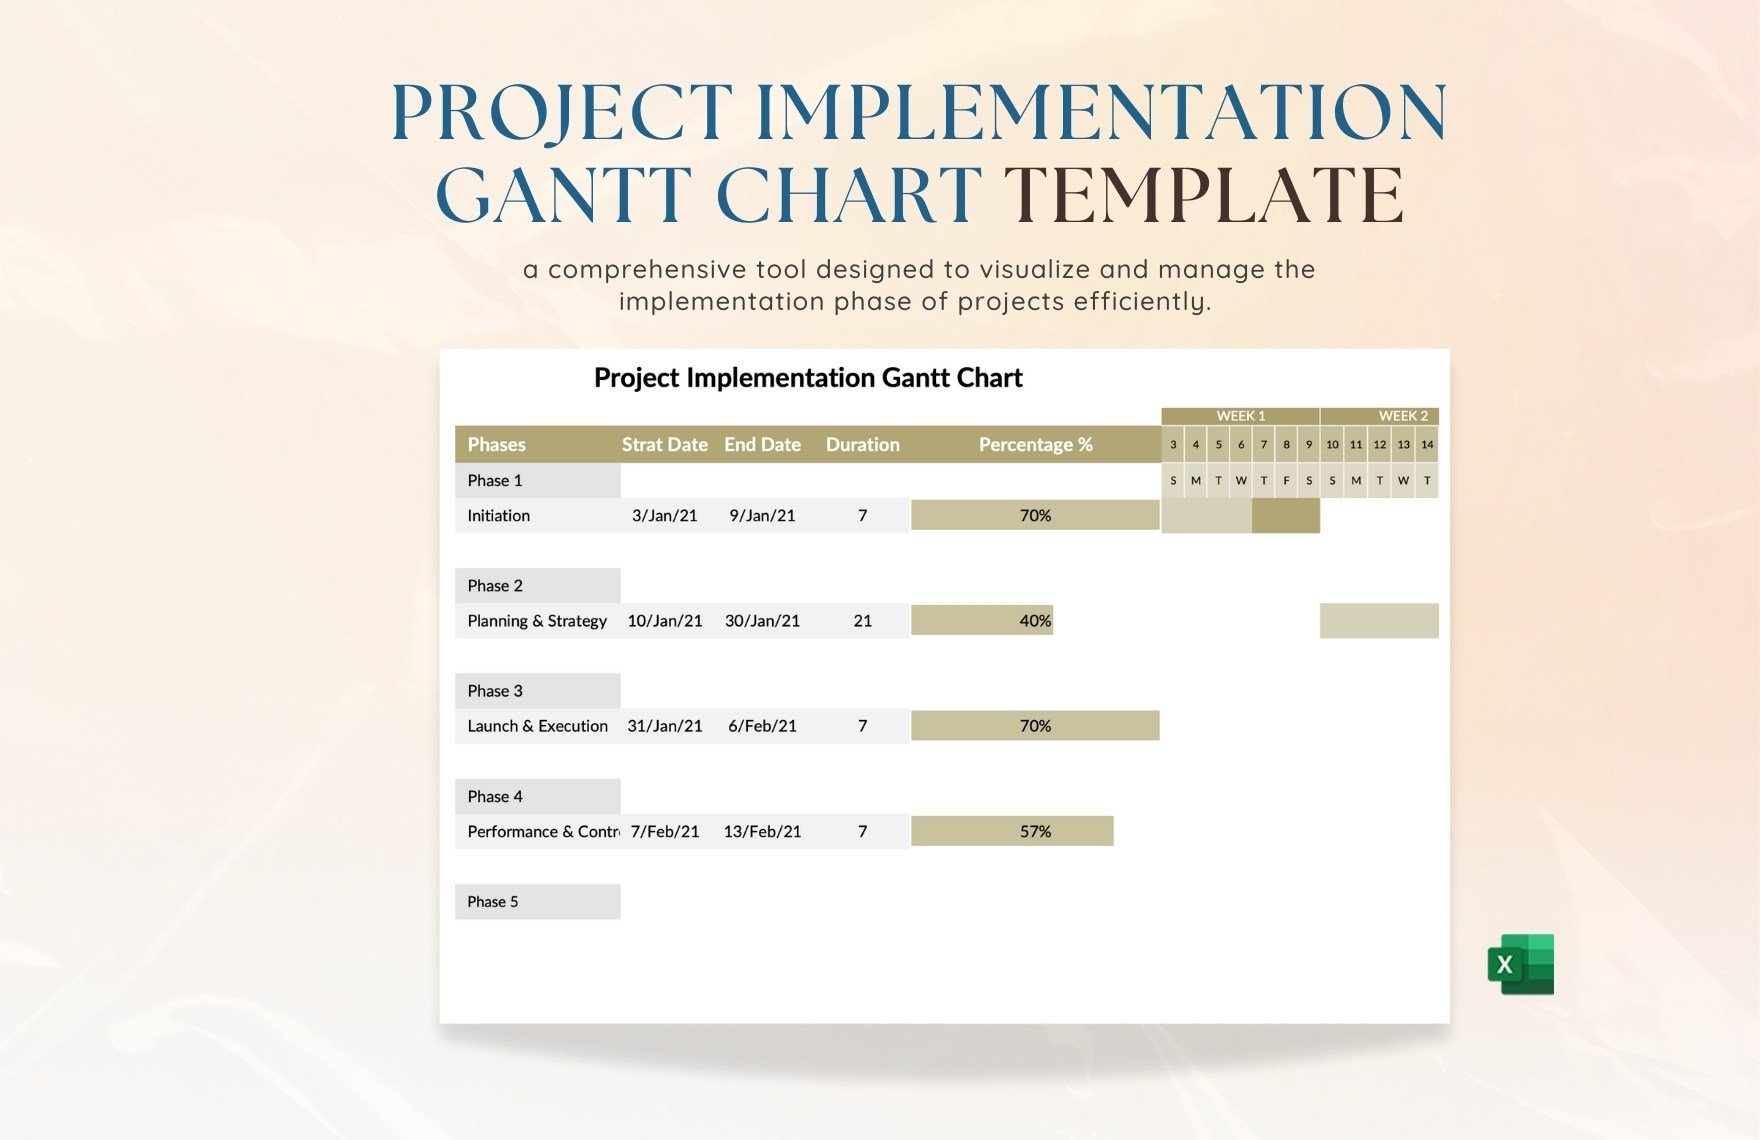 Project Implementation Gantt Chart Template in Excel